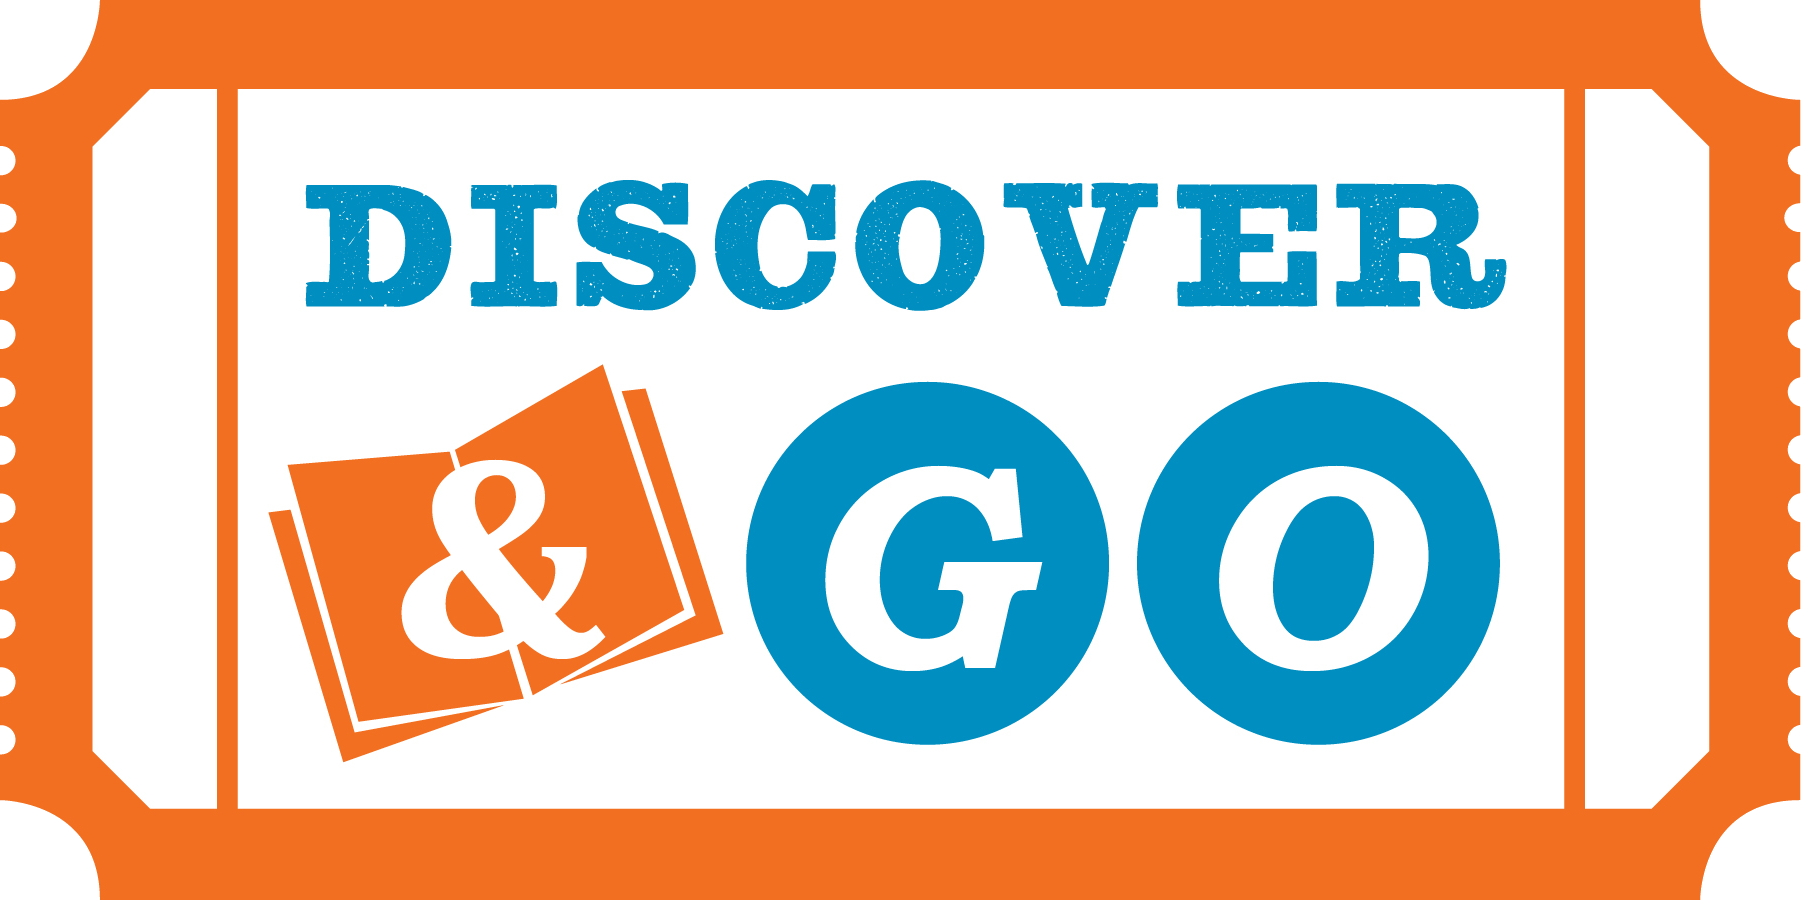 Discover and Go logo on a picture of a ticket